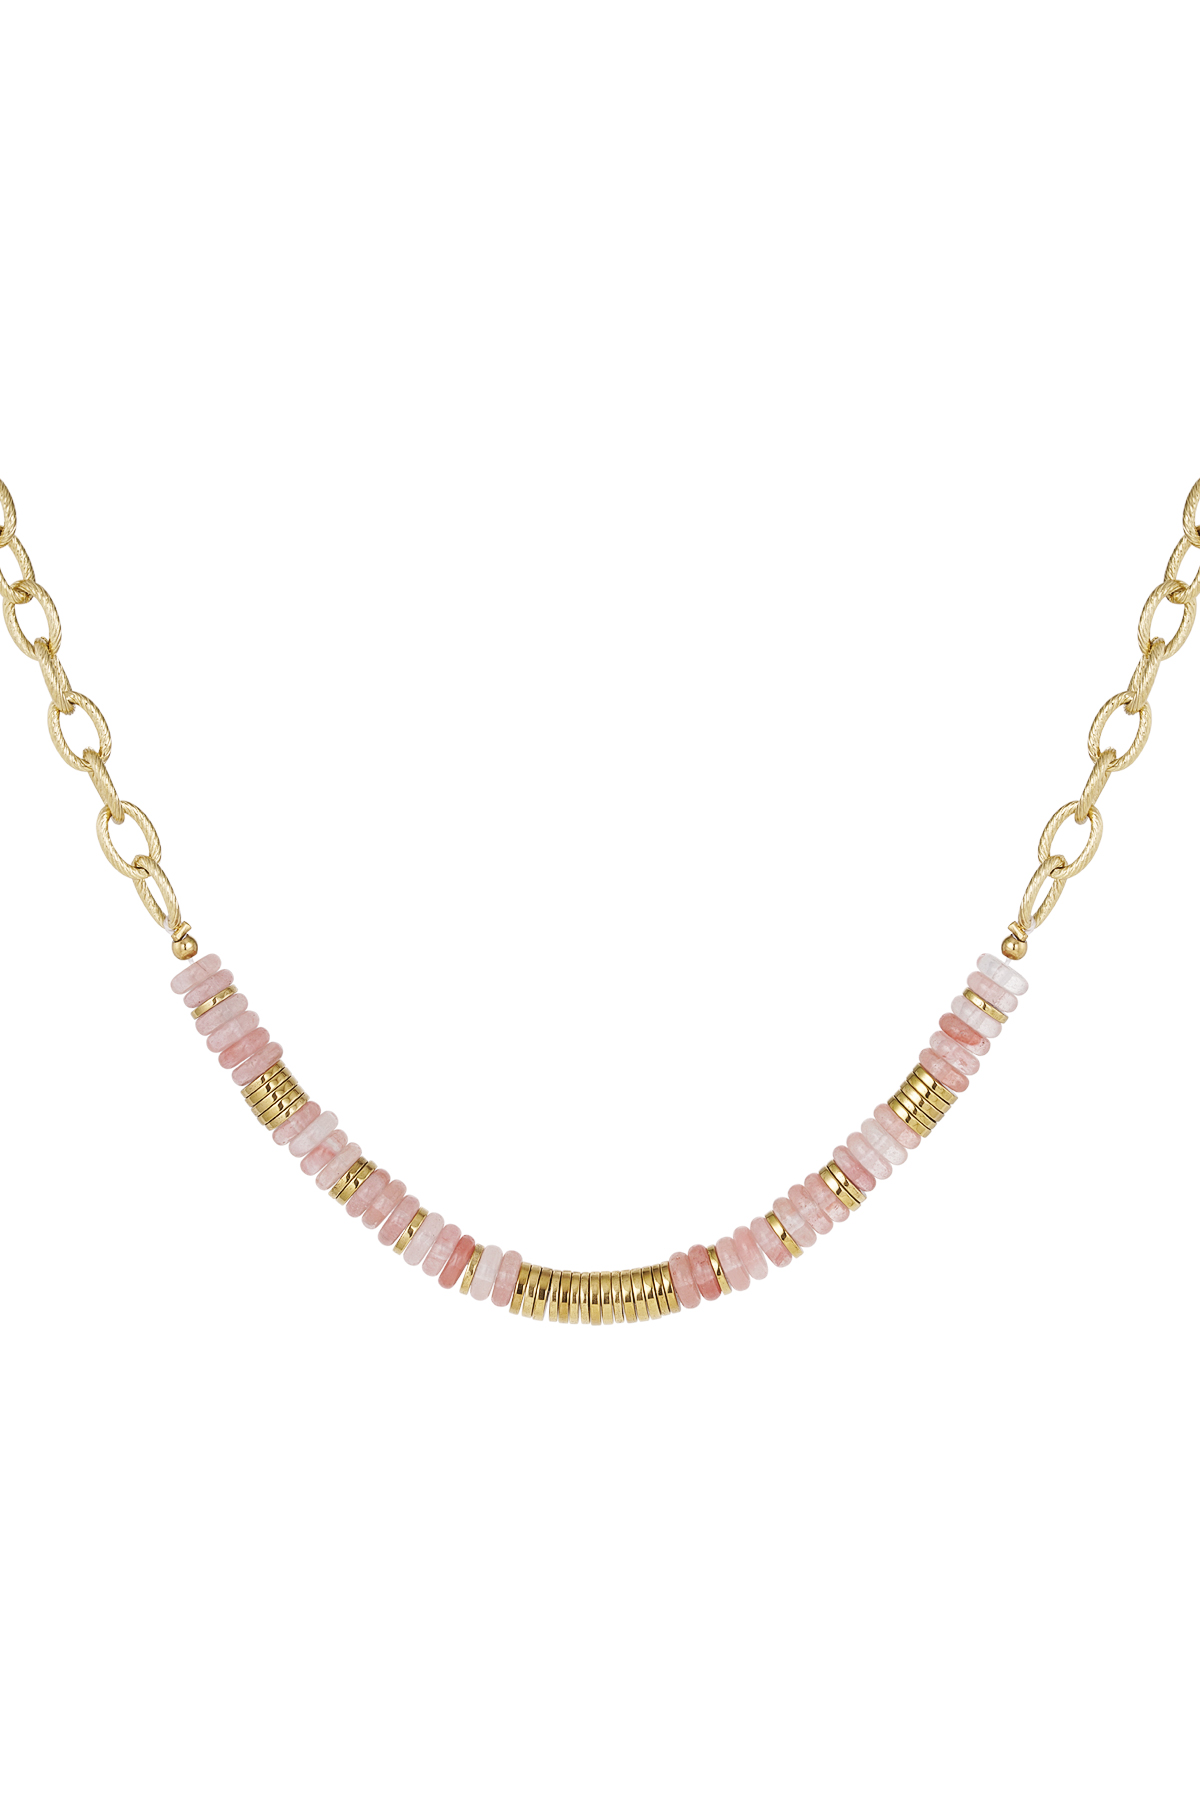 Link chain beads - gold/pink Pink &amp; Gold Stainless Steel